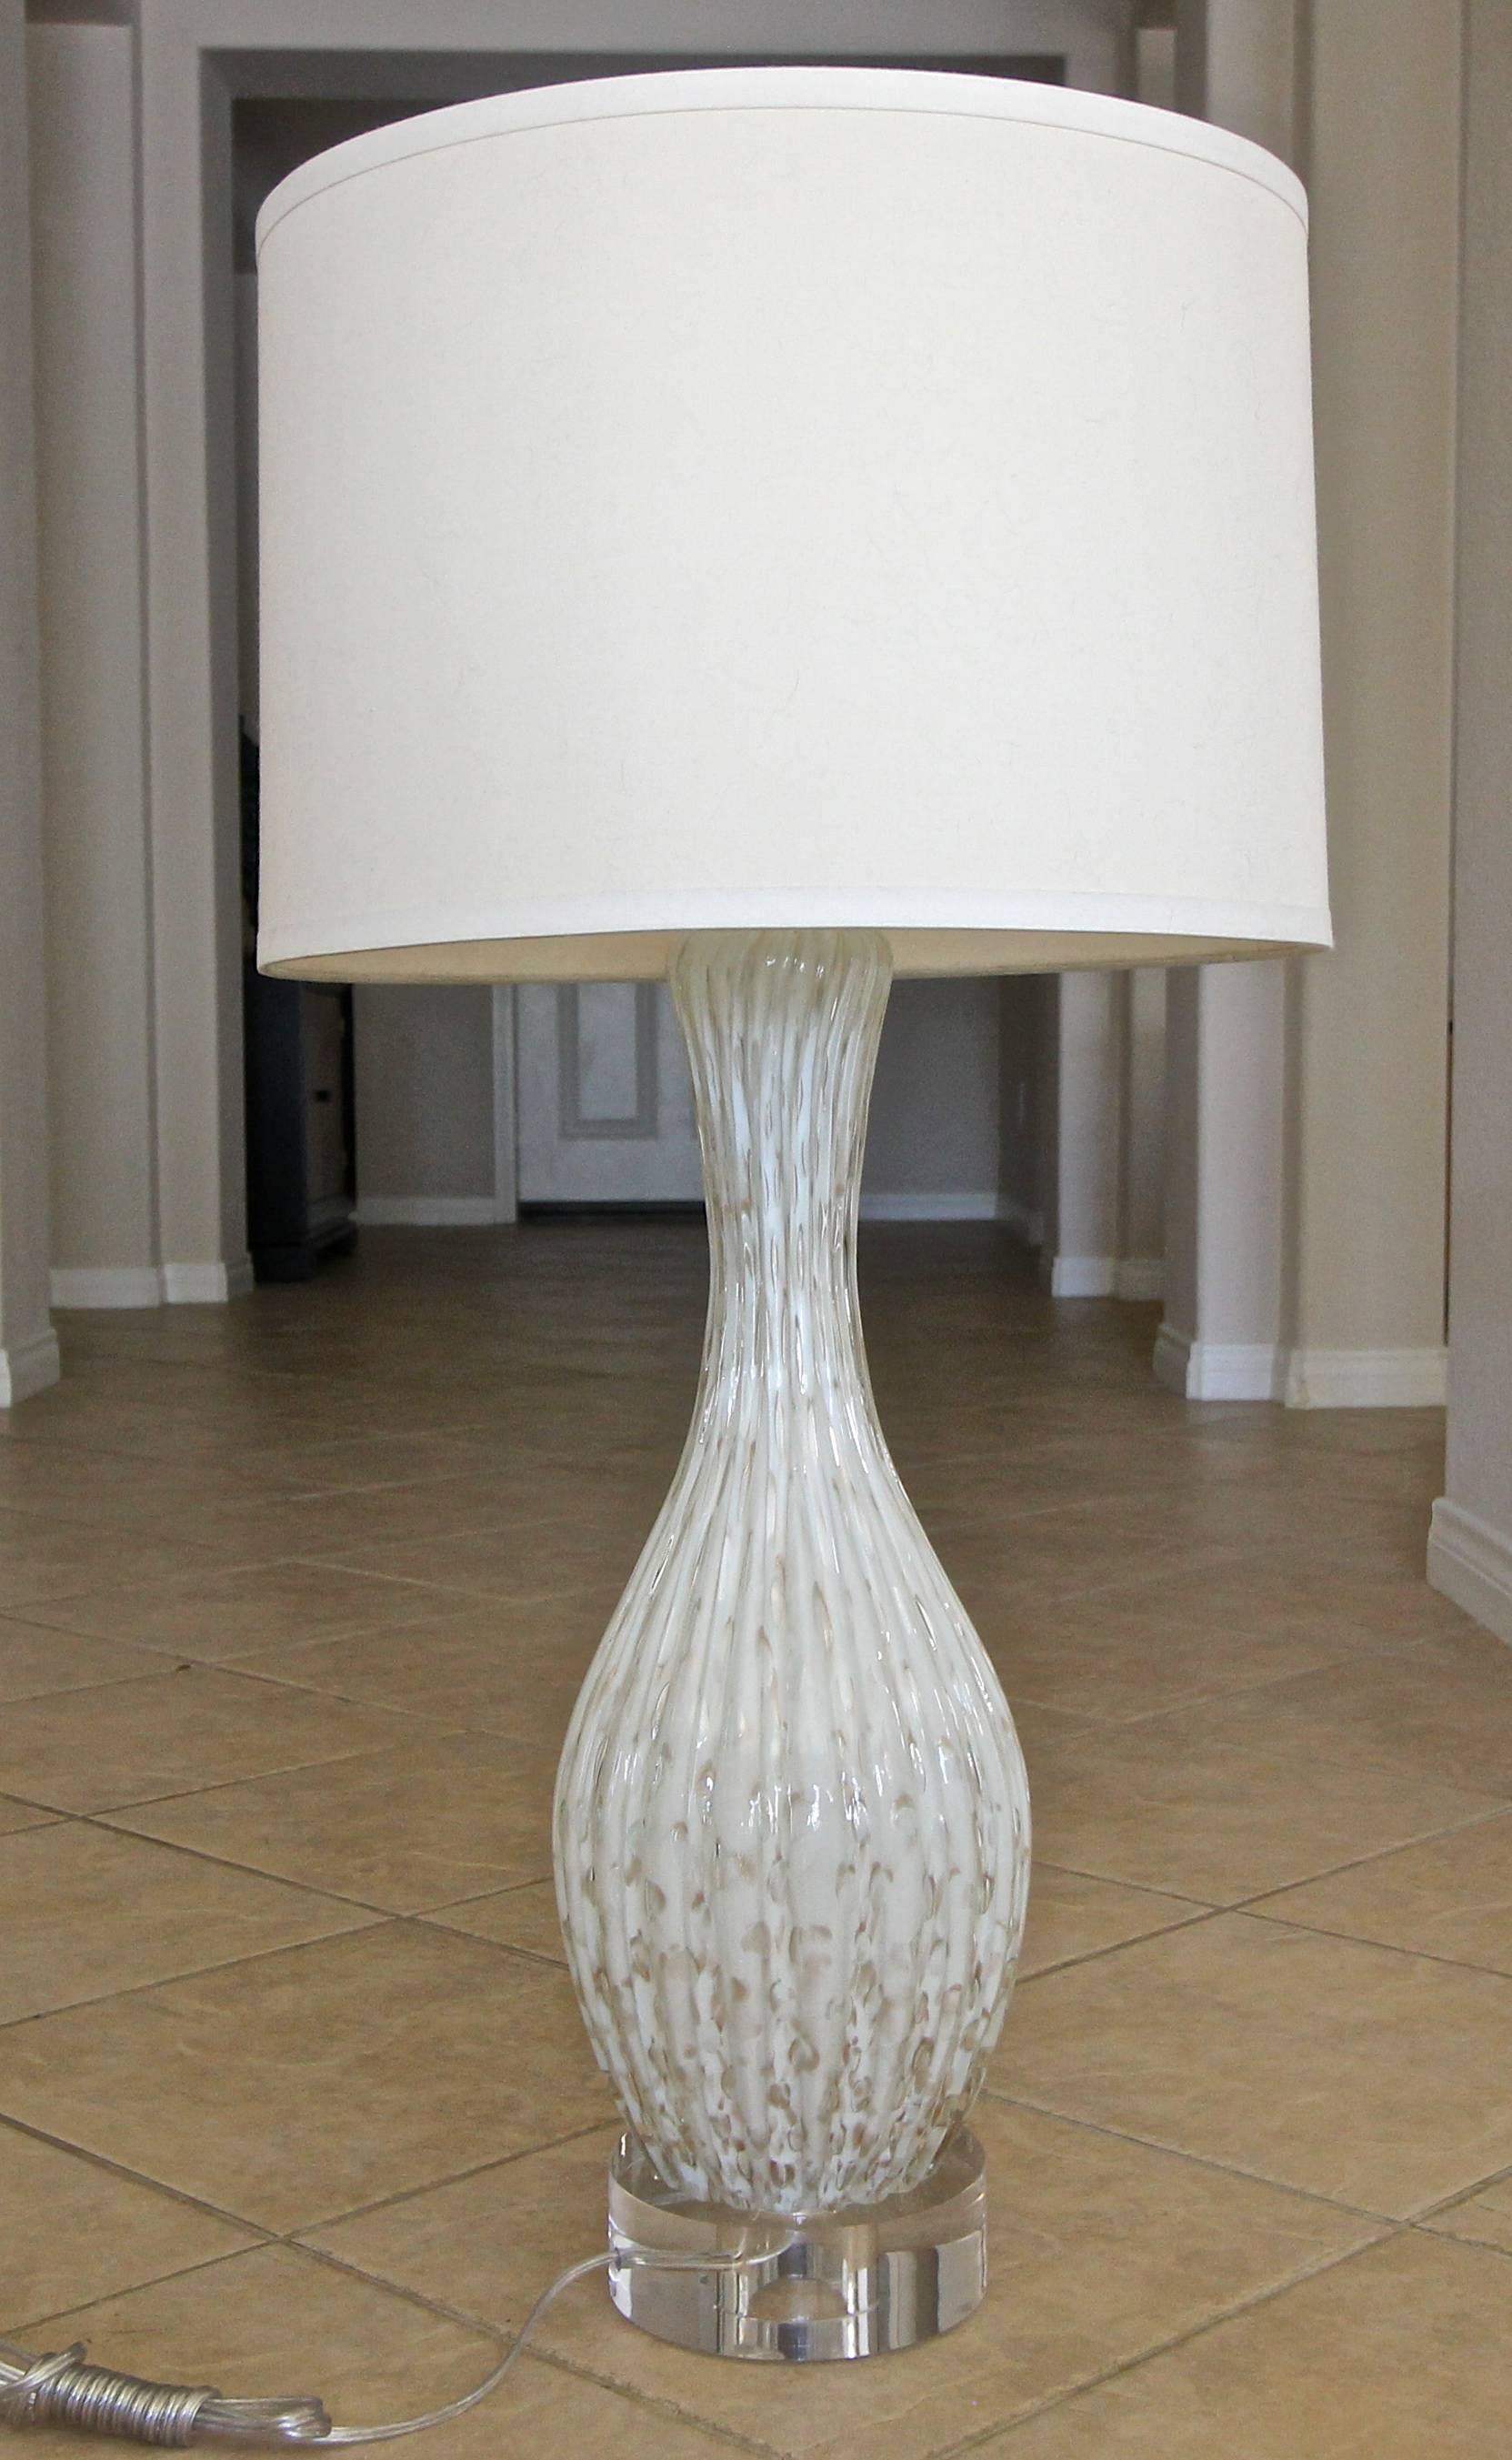 Taller scale Murano Italian handblown white colored glass table lamp with aventurine inclusions and controlled bubbles throughout on thick custom acrylic base. Rewired with all new fittings including new three way brass socket and cord. Size of